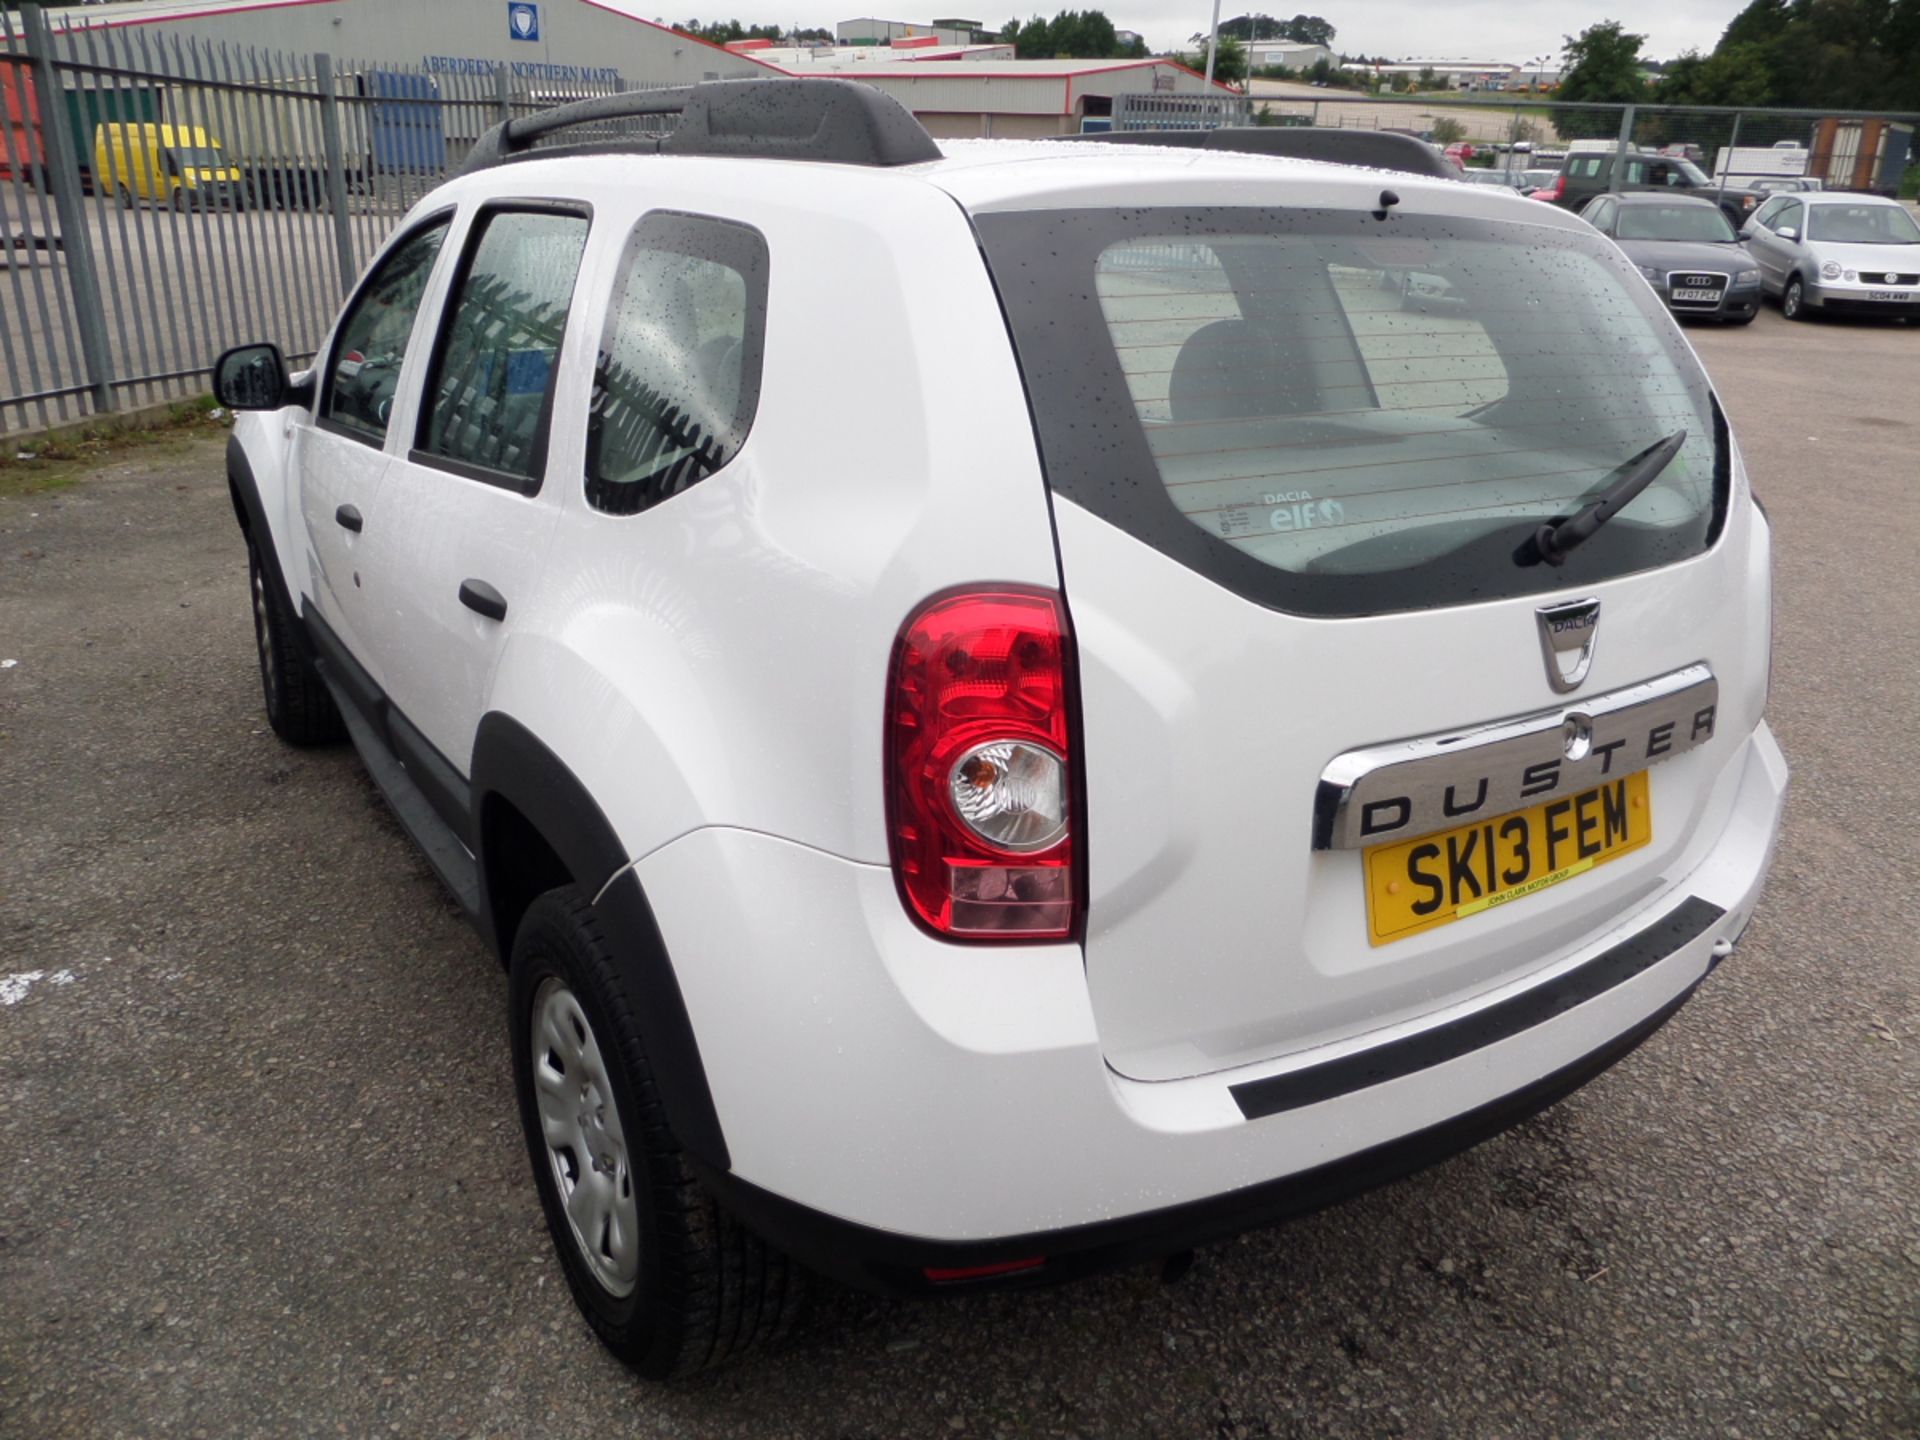 Dacia Duster Ambiance Dci 4x2 - 1461cc 5 Door - Image 3 of 9